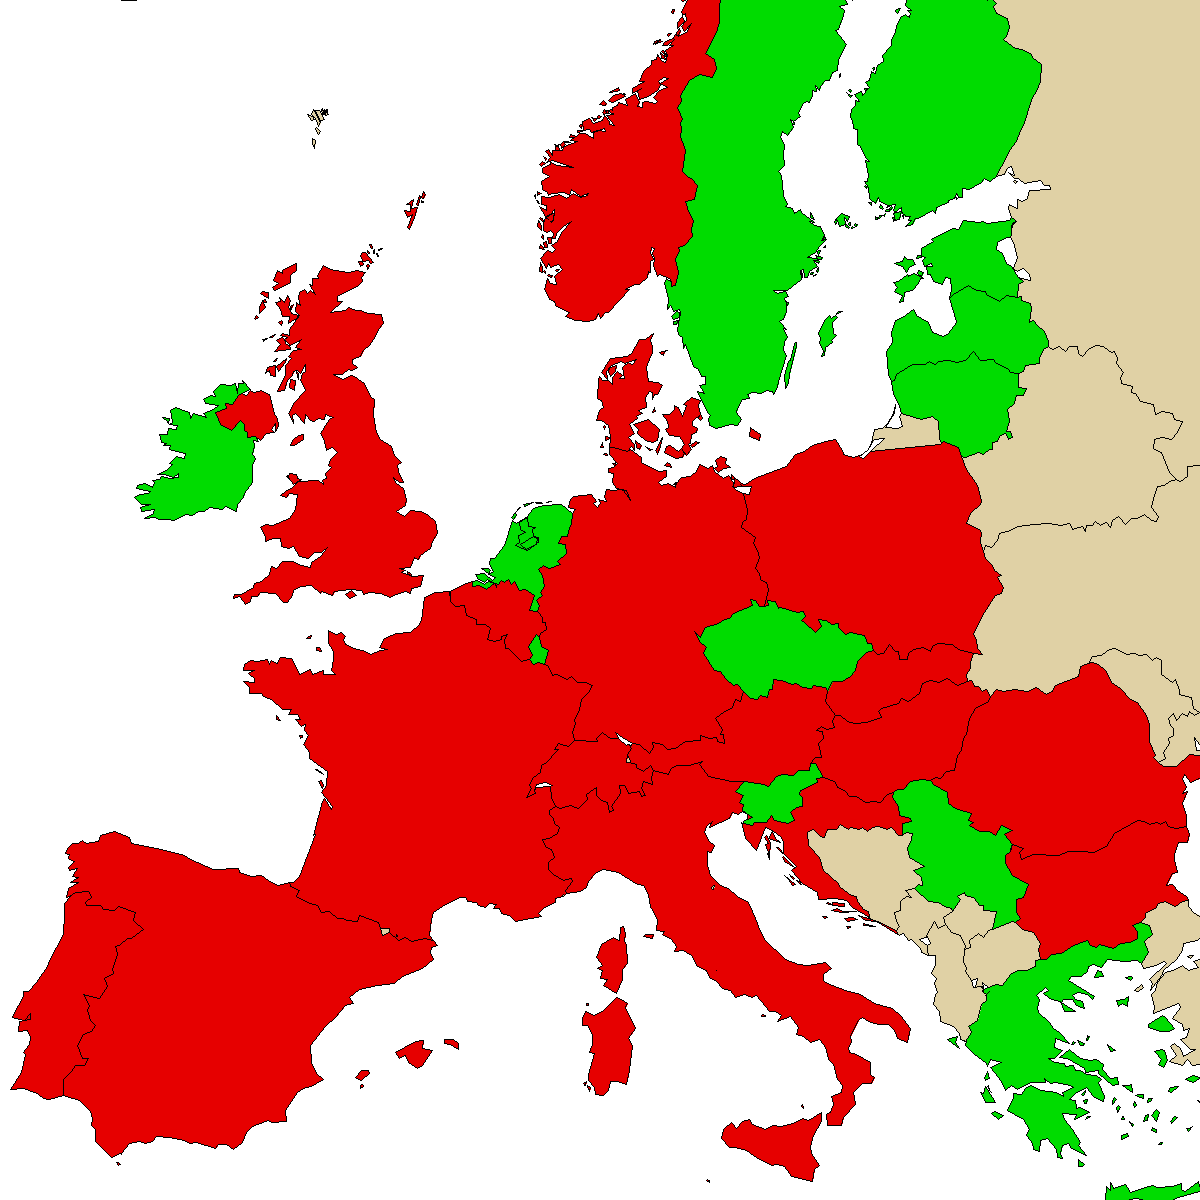 legal info map for our product Euthylone, green are countries with no ban, red with ban, grey is unknown